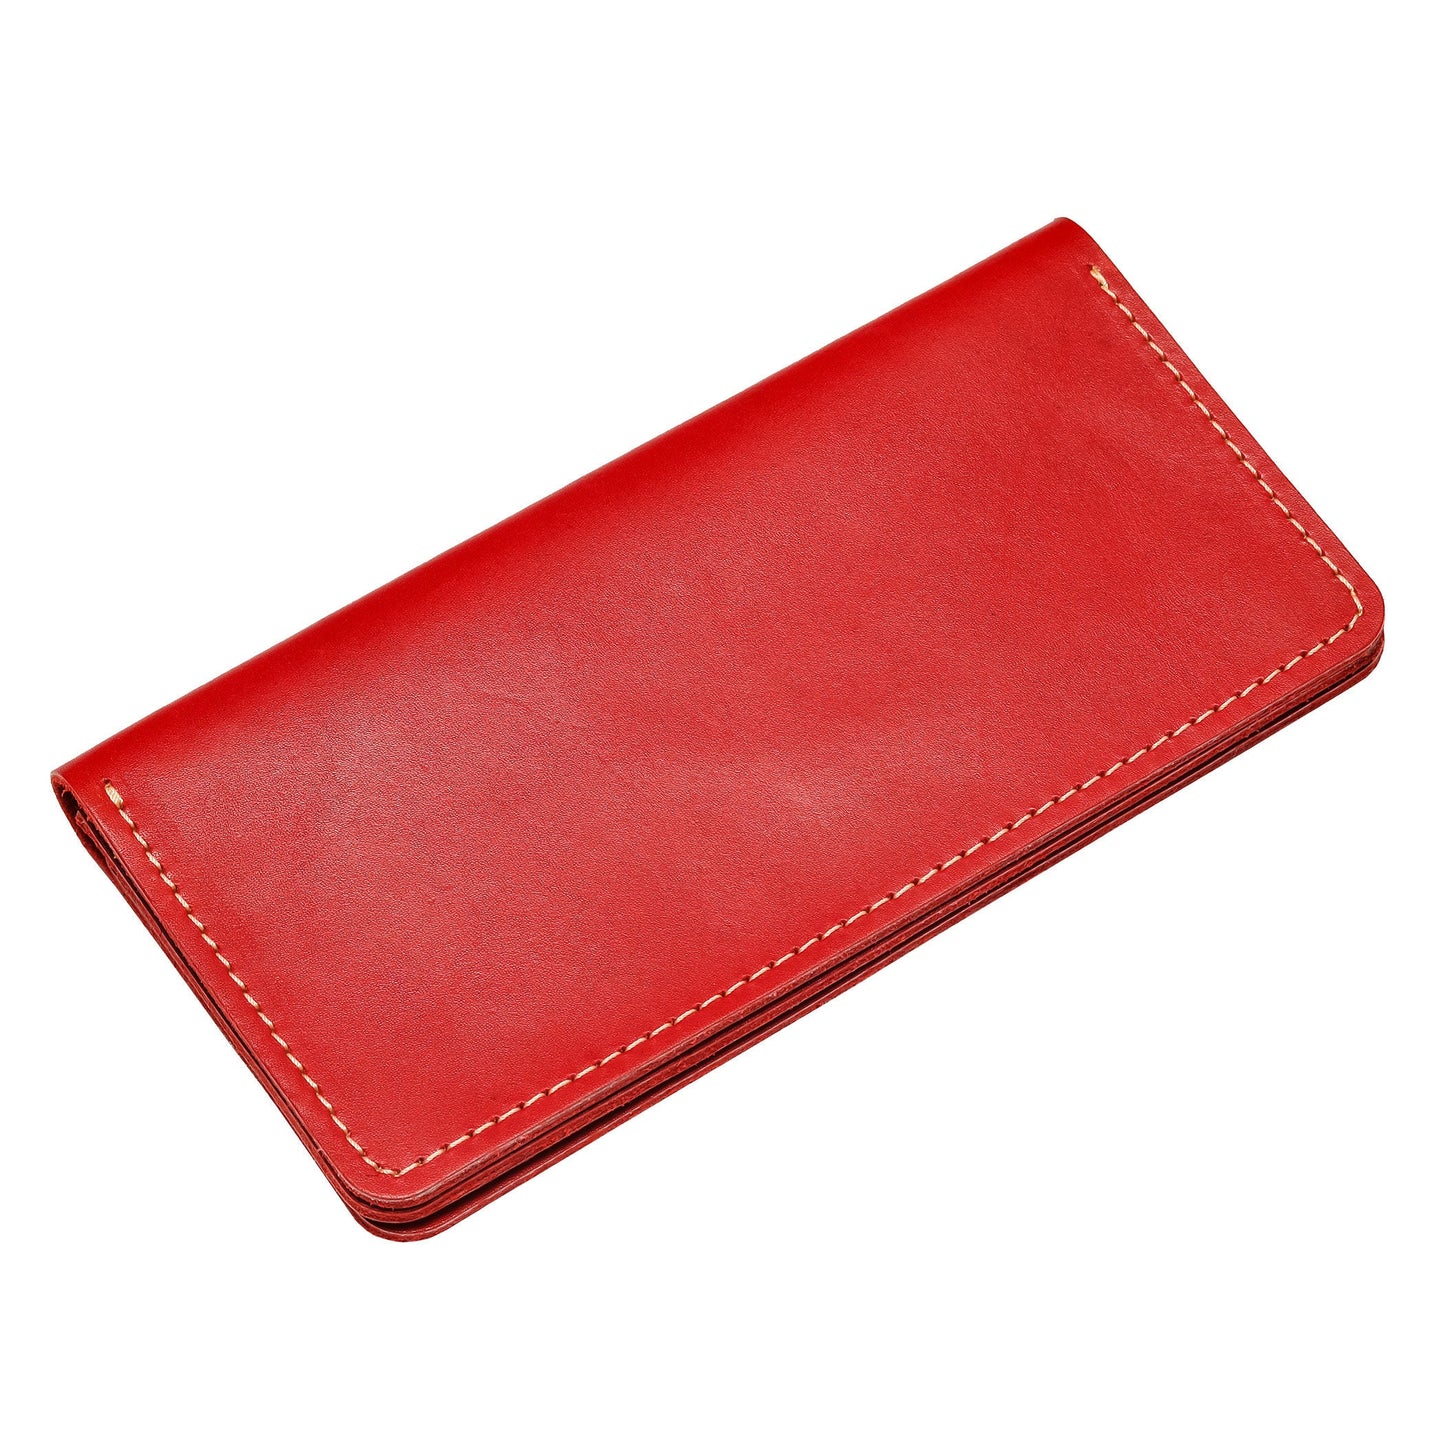 leather wallet | Leather Wallet With Card Holder | Zip Coin Pocket | Gifts For Her